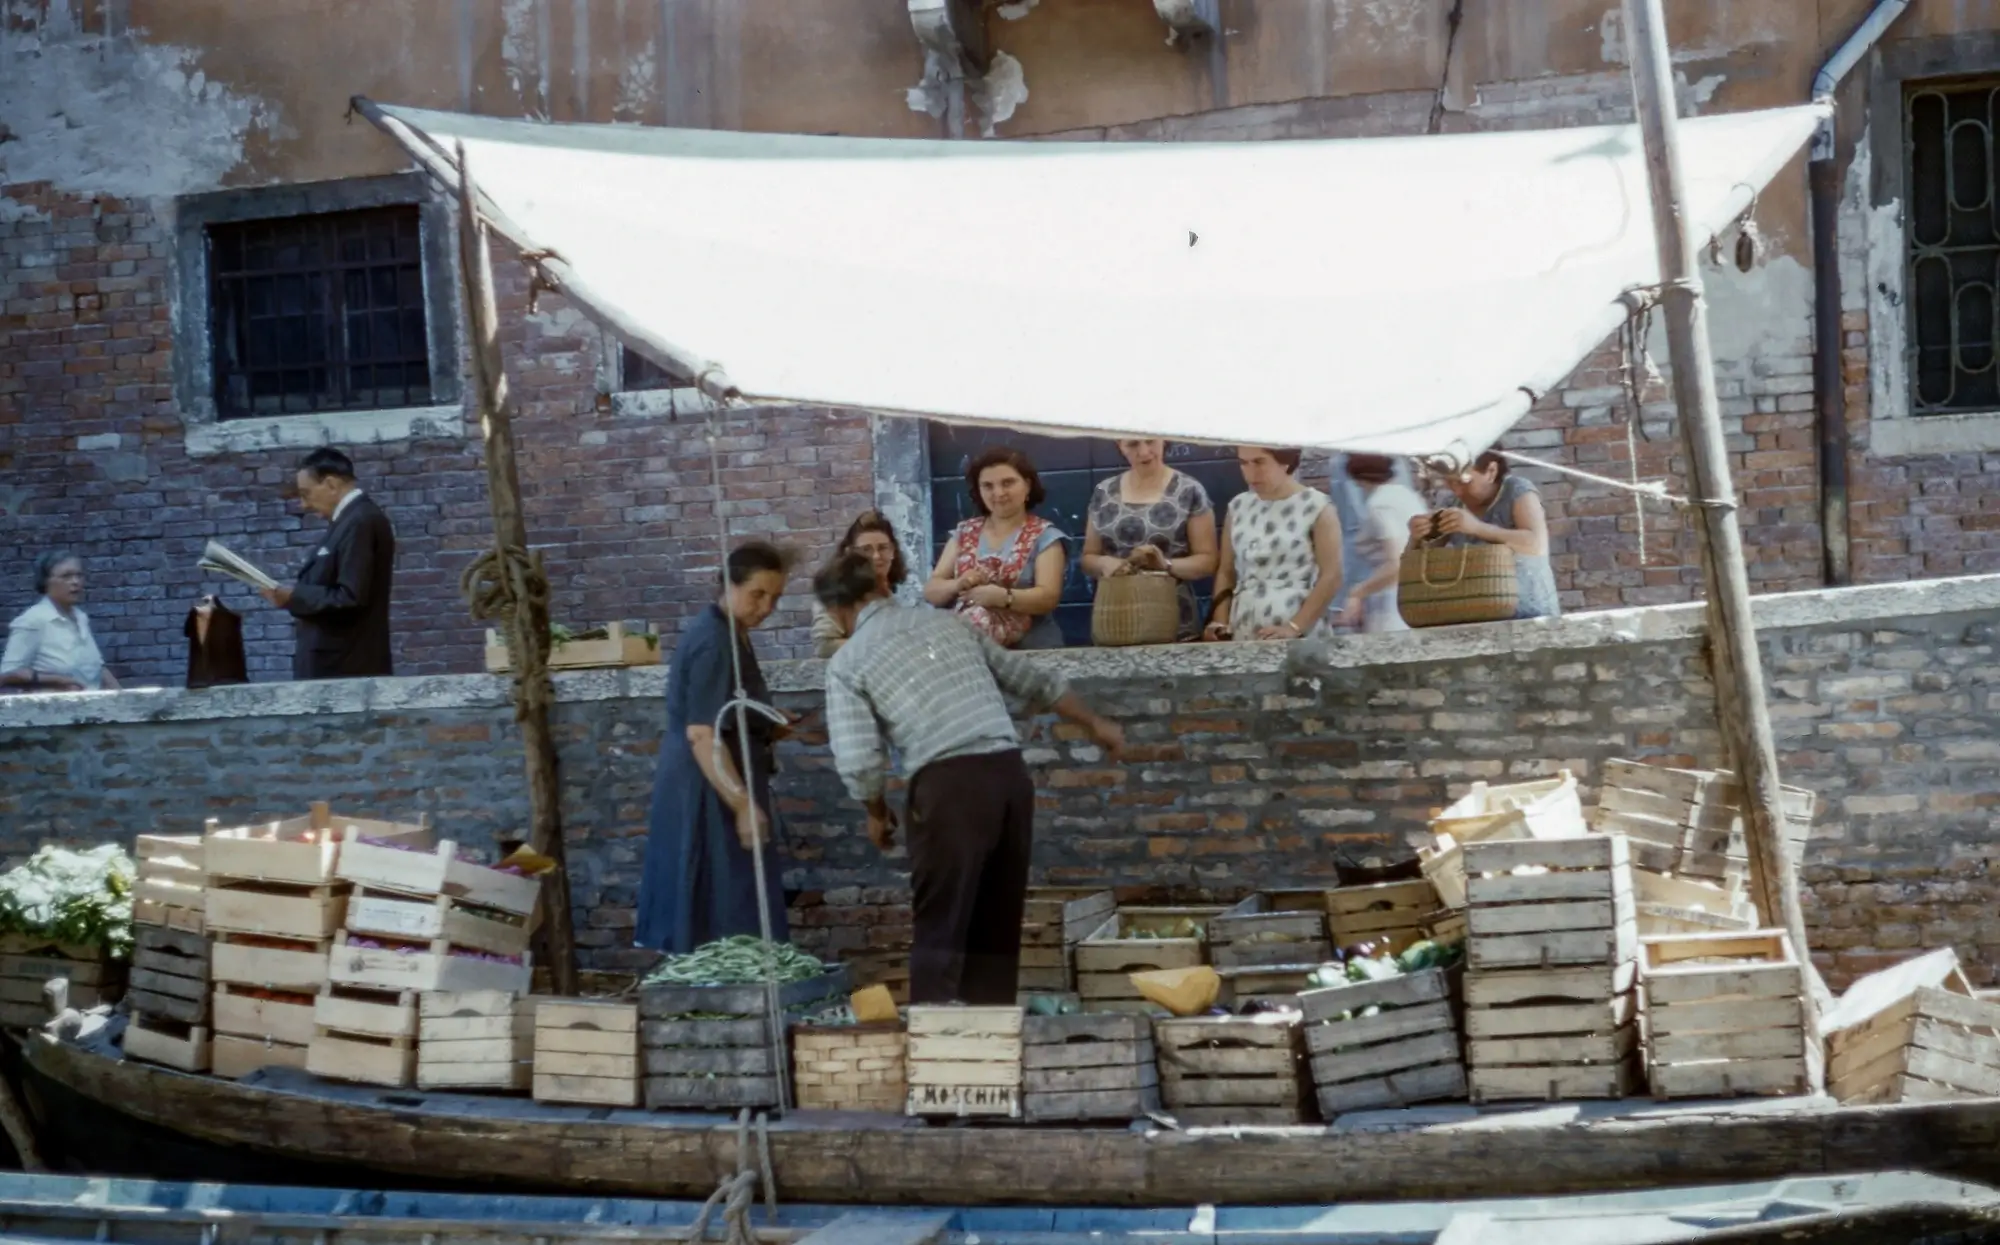 A vendor handing goods to his buyers from his floating store.